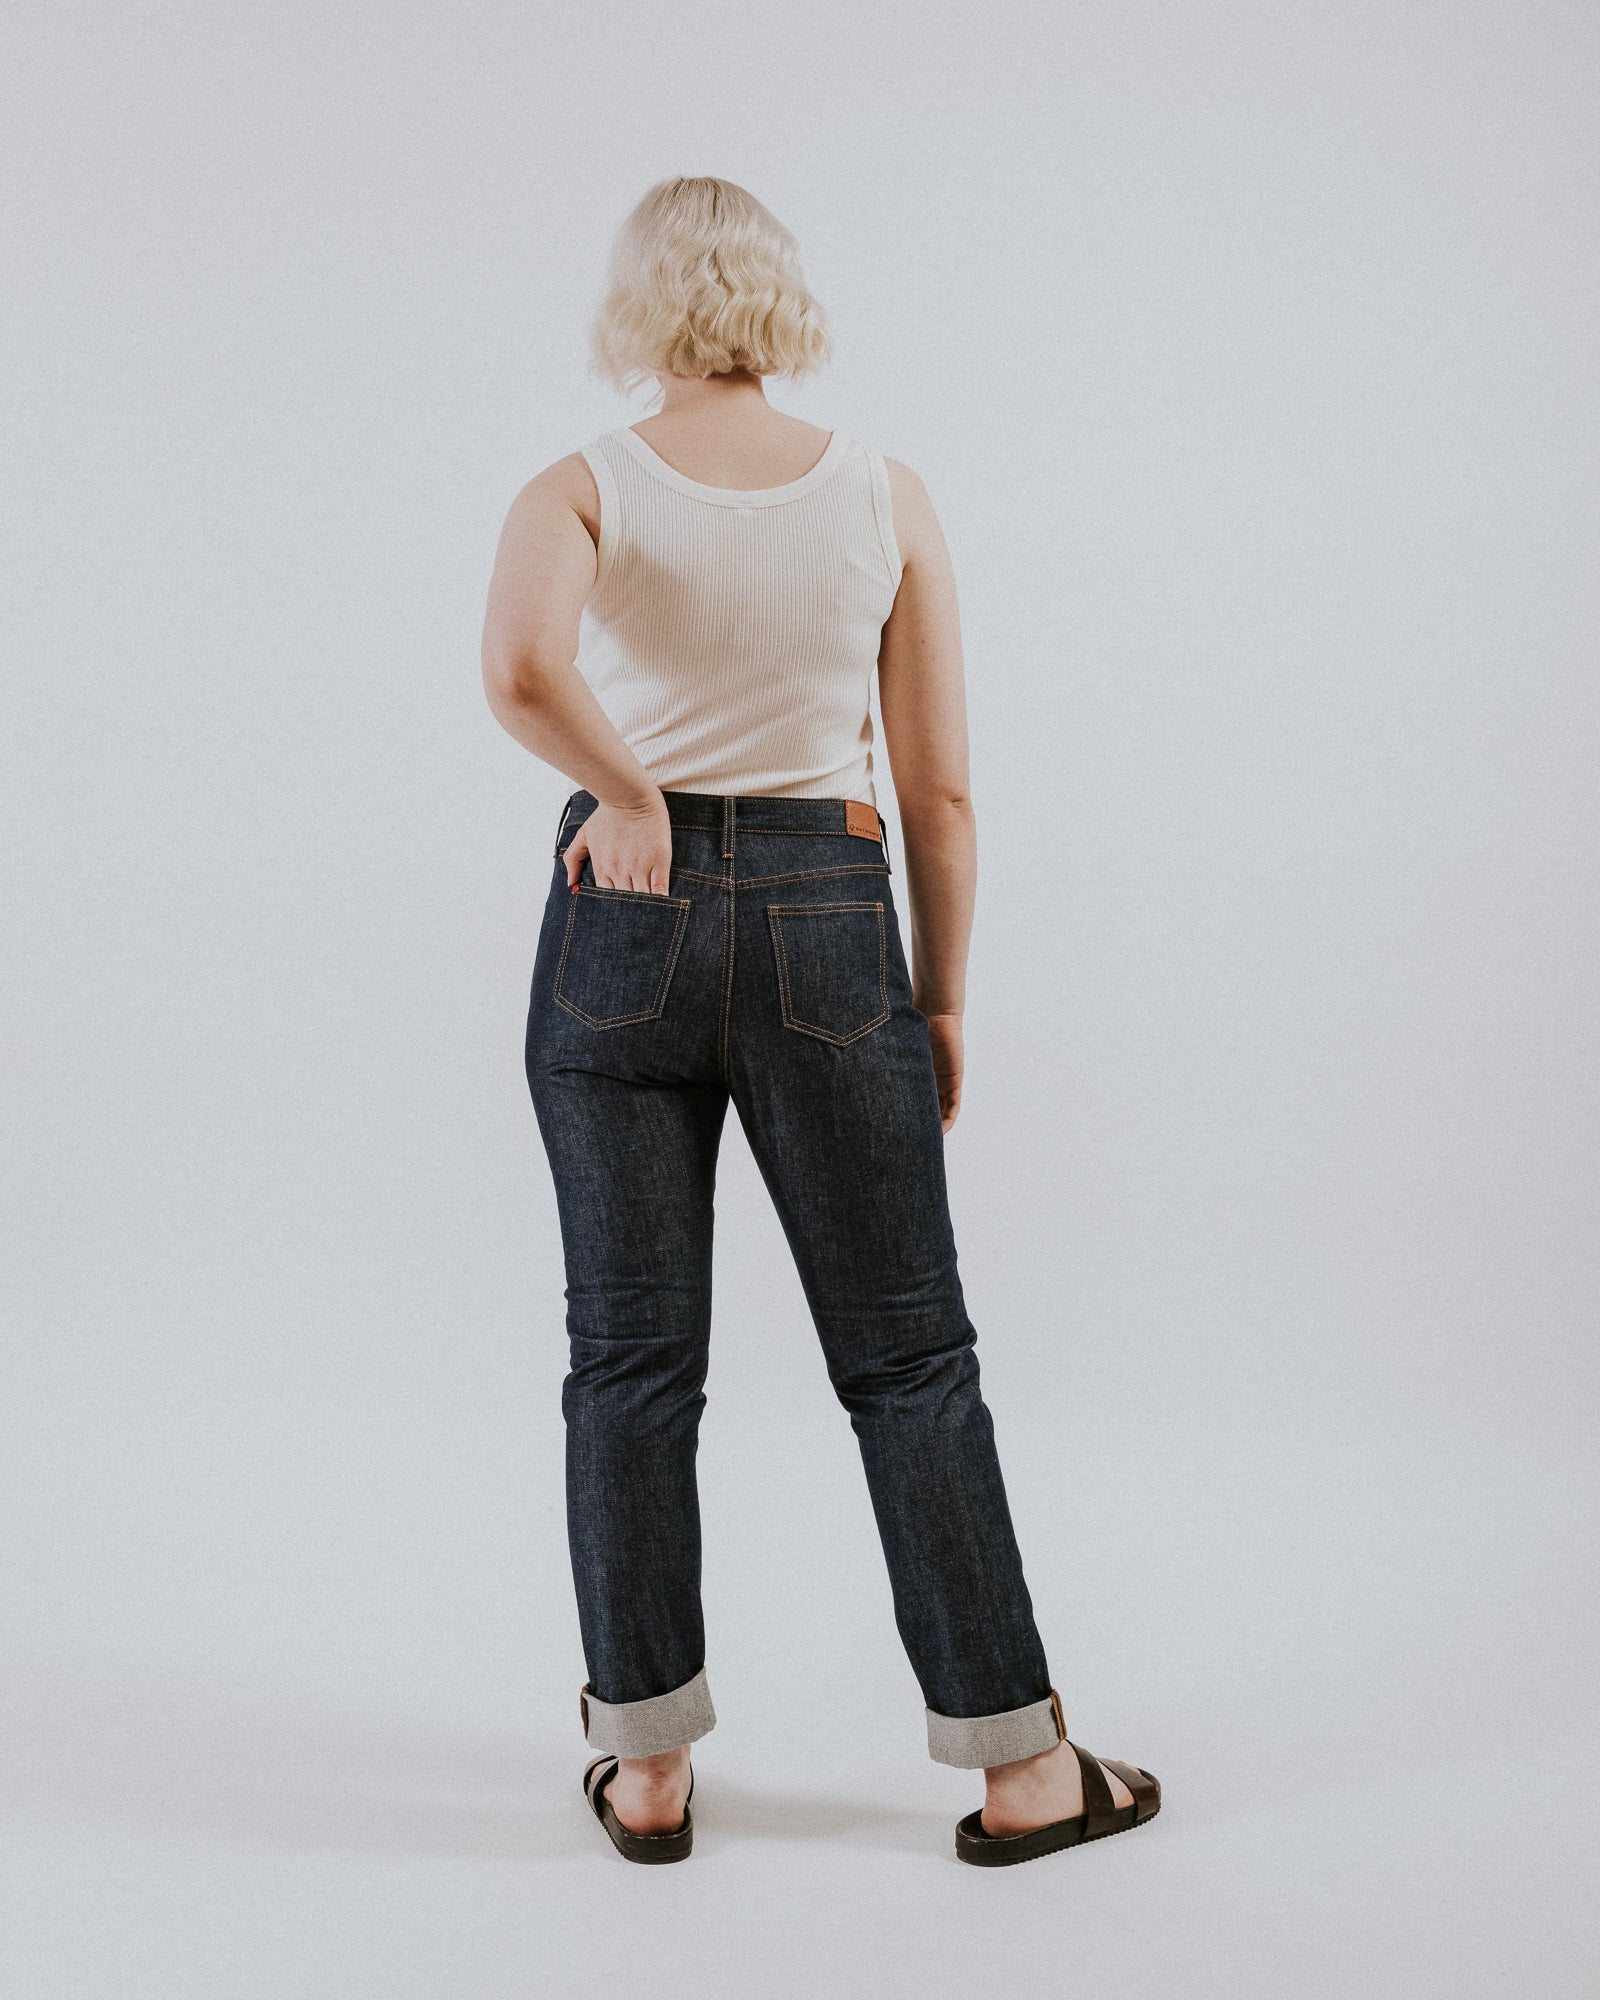 Style & Co Women's Bootcut Jeans in Regular, Short and Long Lengths,  Created for Macy's - Macy's